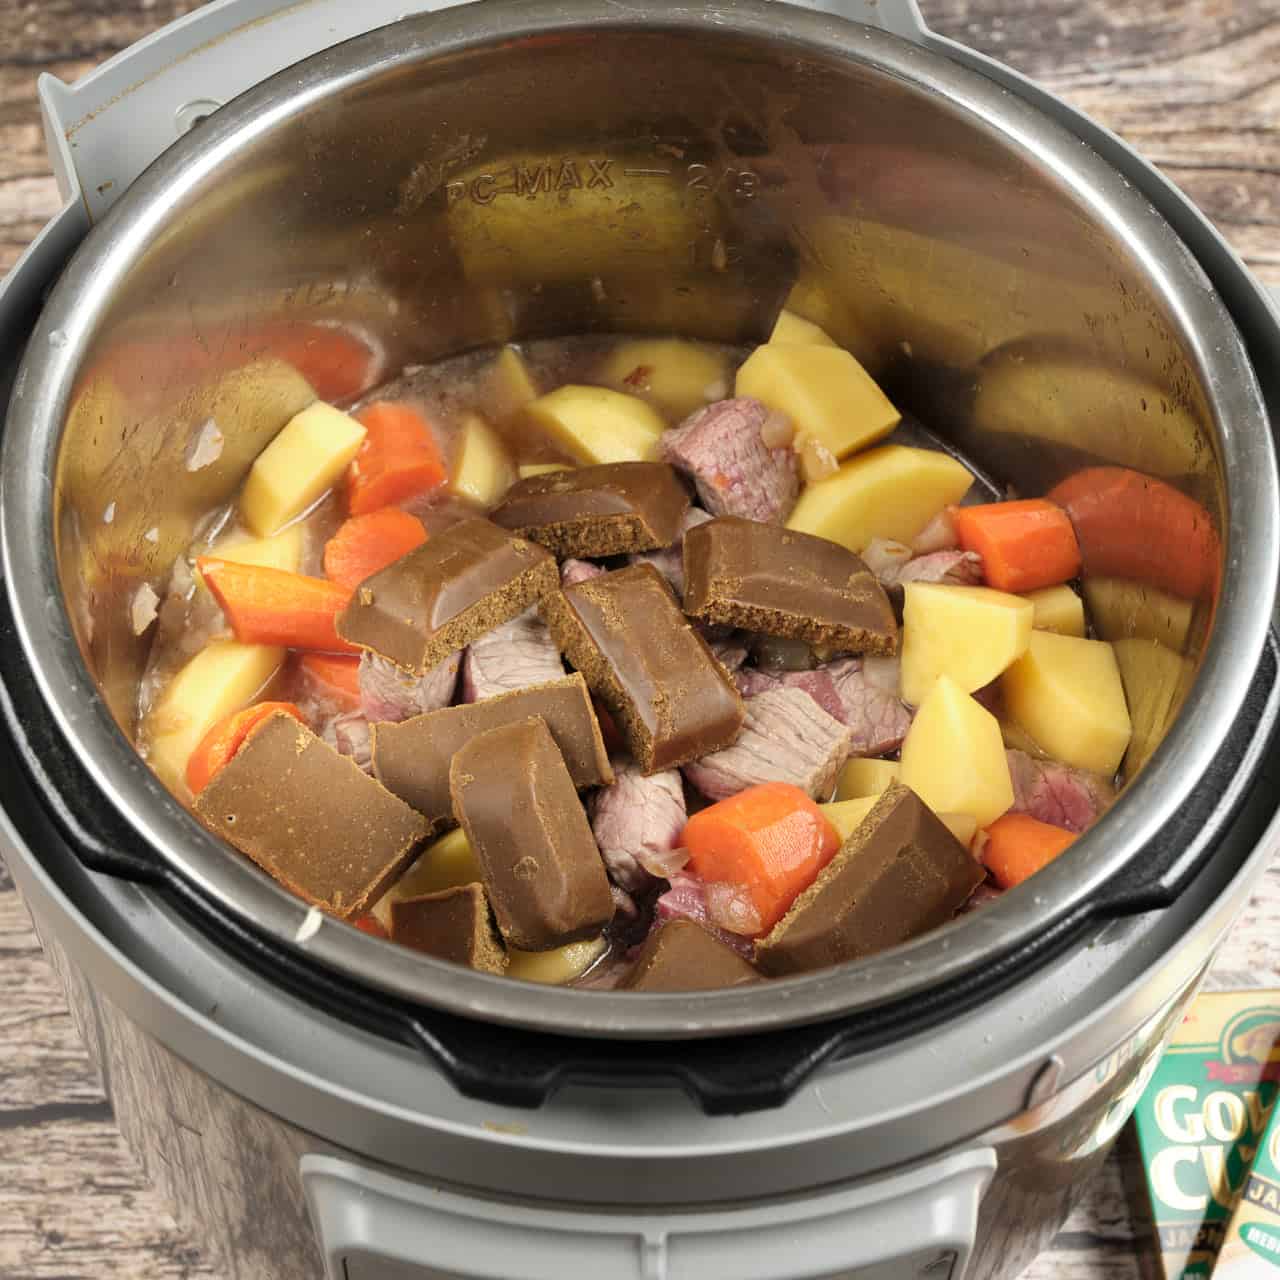 All the Japanese Curry ingredients in an Instant Pot with the Curry Mix cubes on top